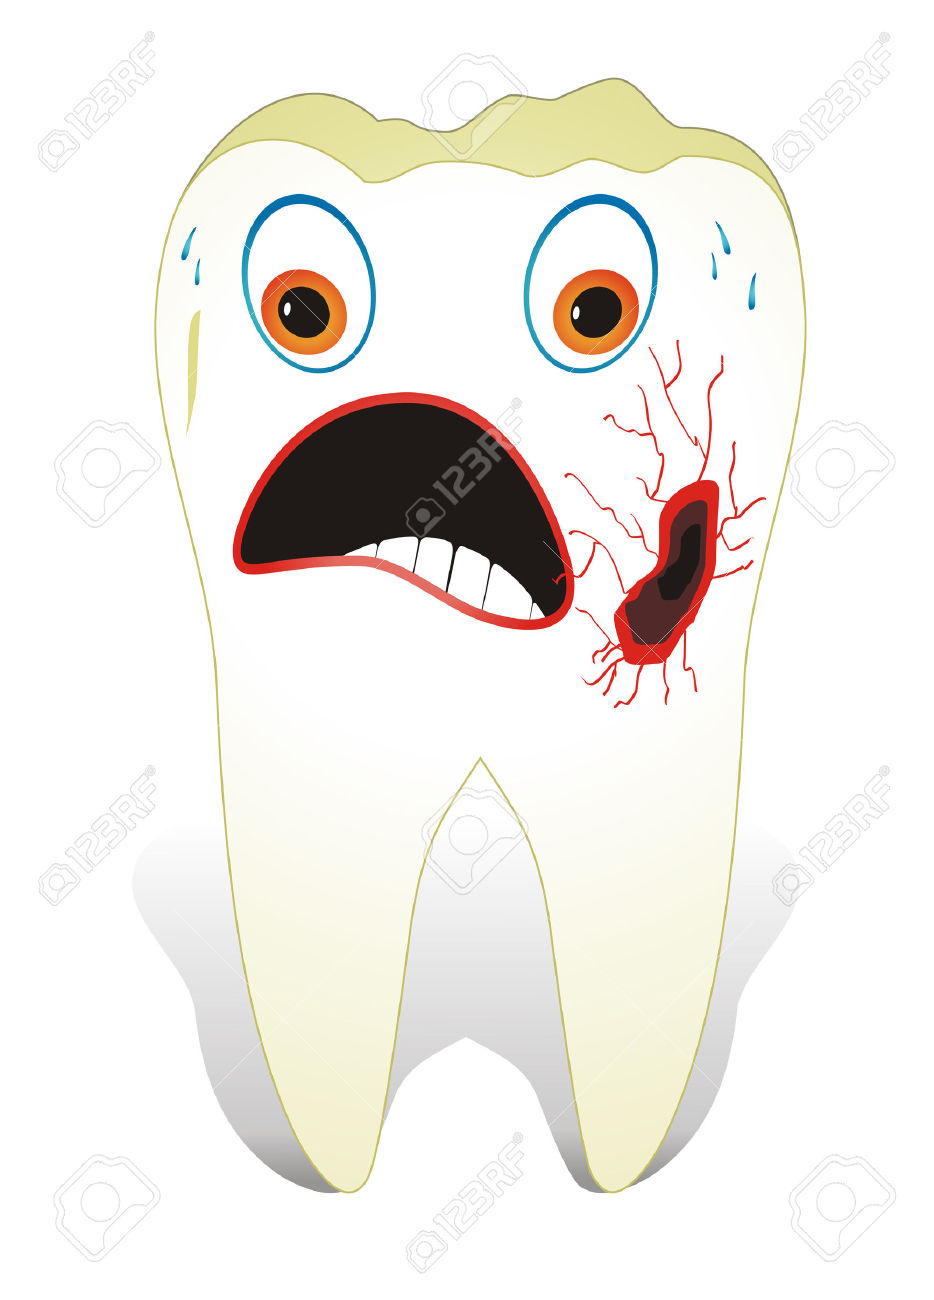 Pictures free download best. Dentist clipart unhealthy tooth